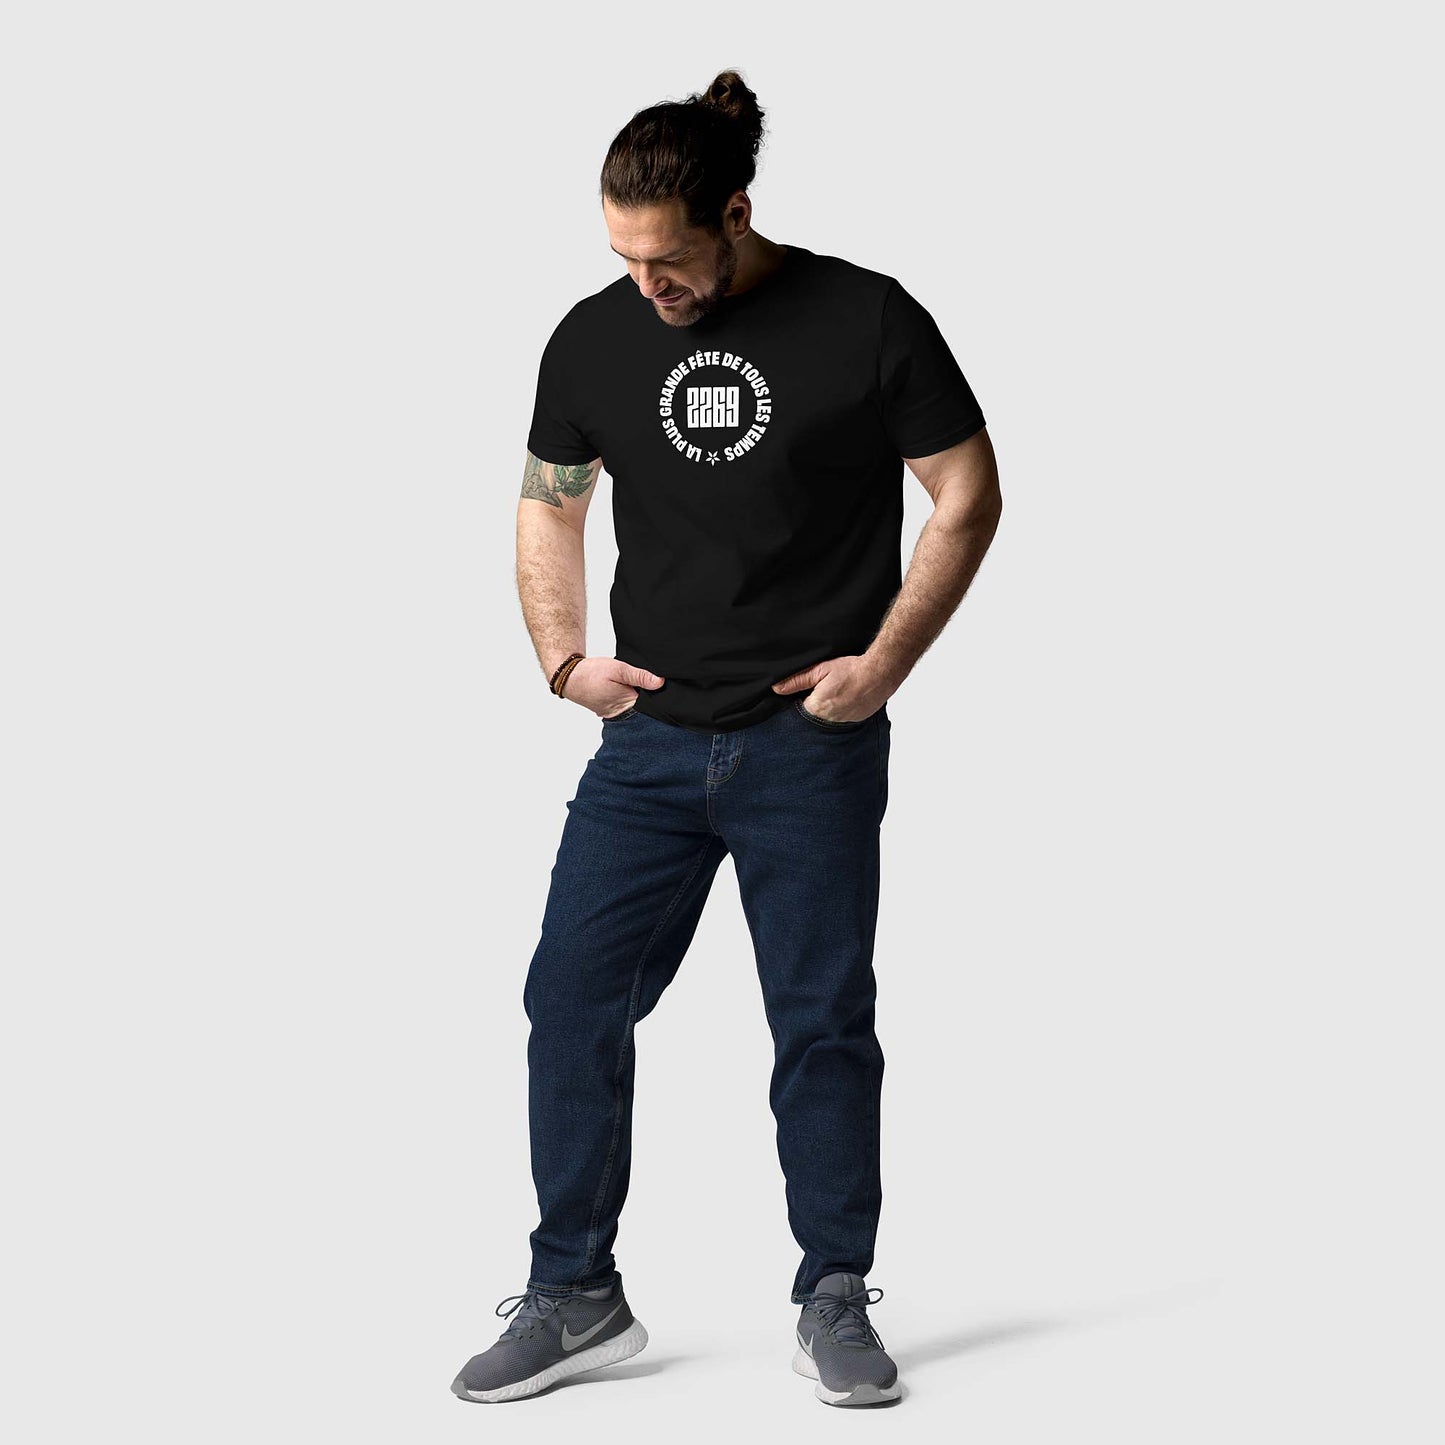 Men's black organic cotton t-shirt with French 2269 party circle